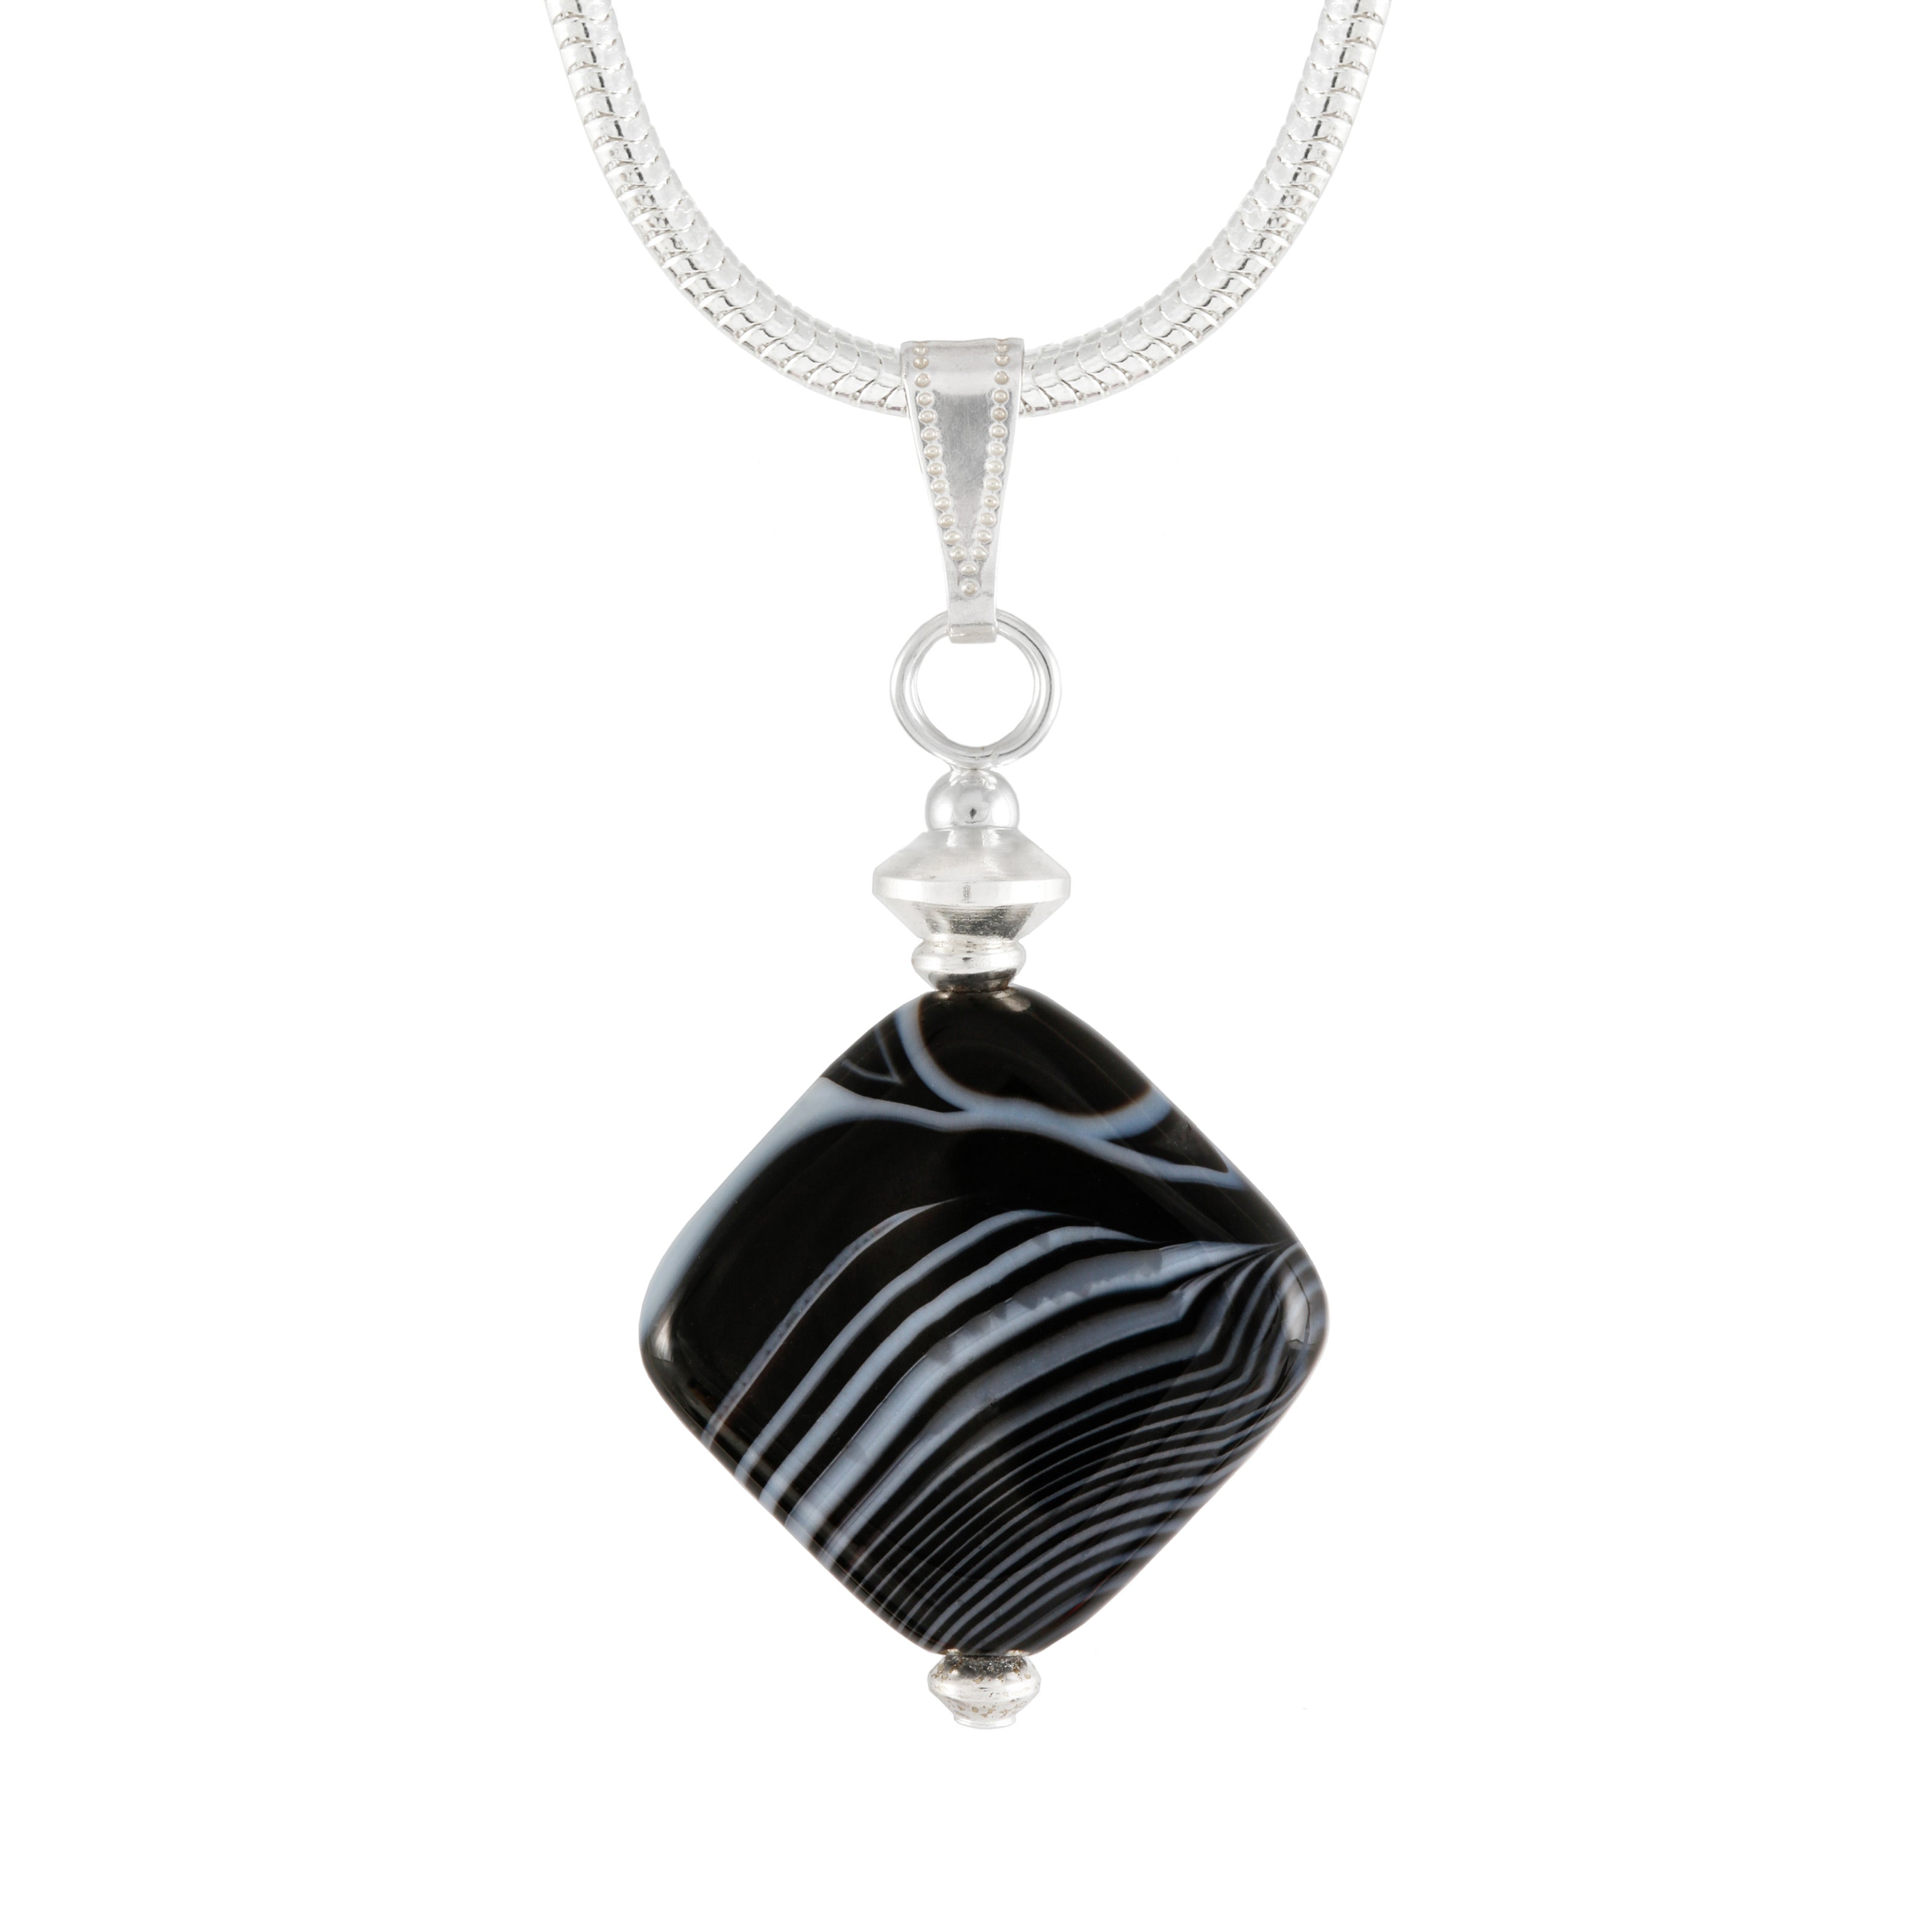 Black and White Banded Agate Necklace, diamond shaped agate pendant on silver plated snake chain